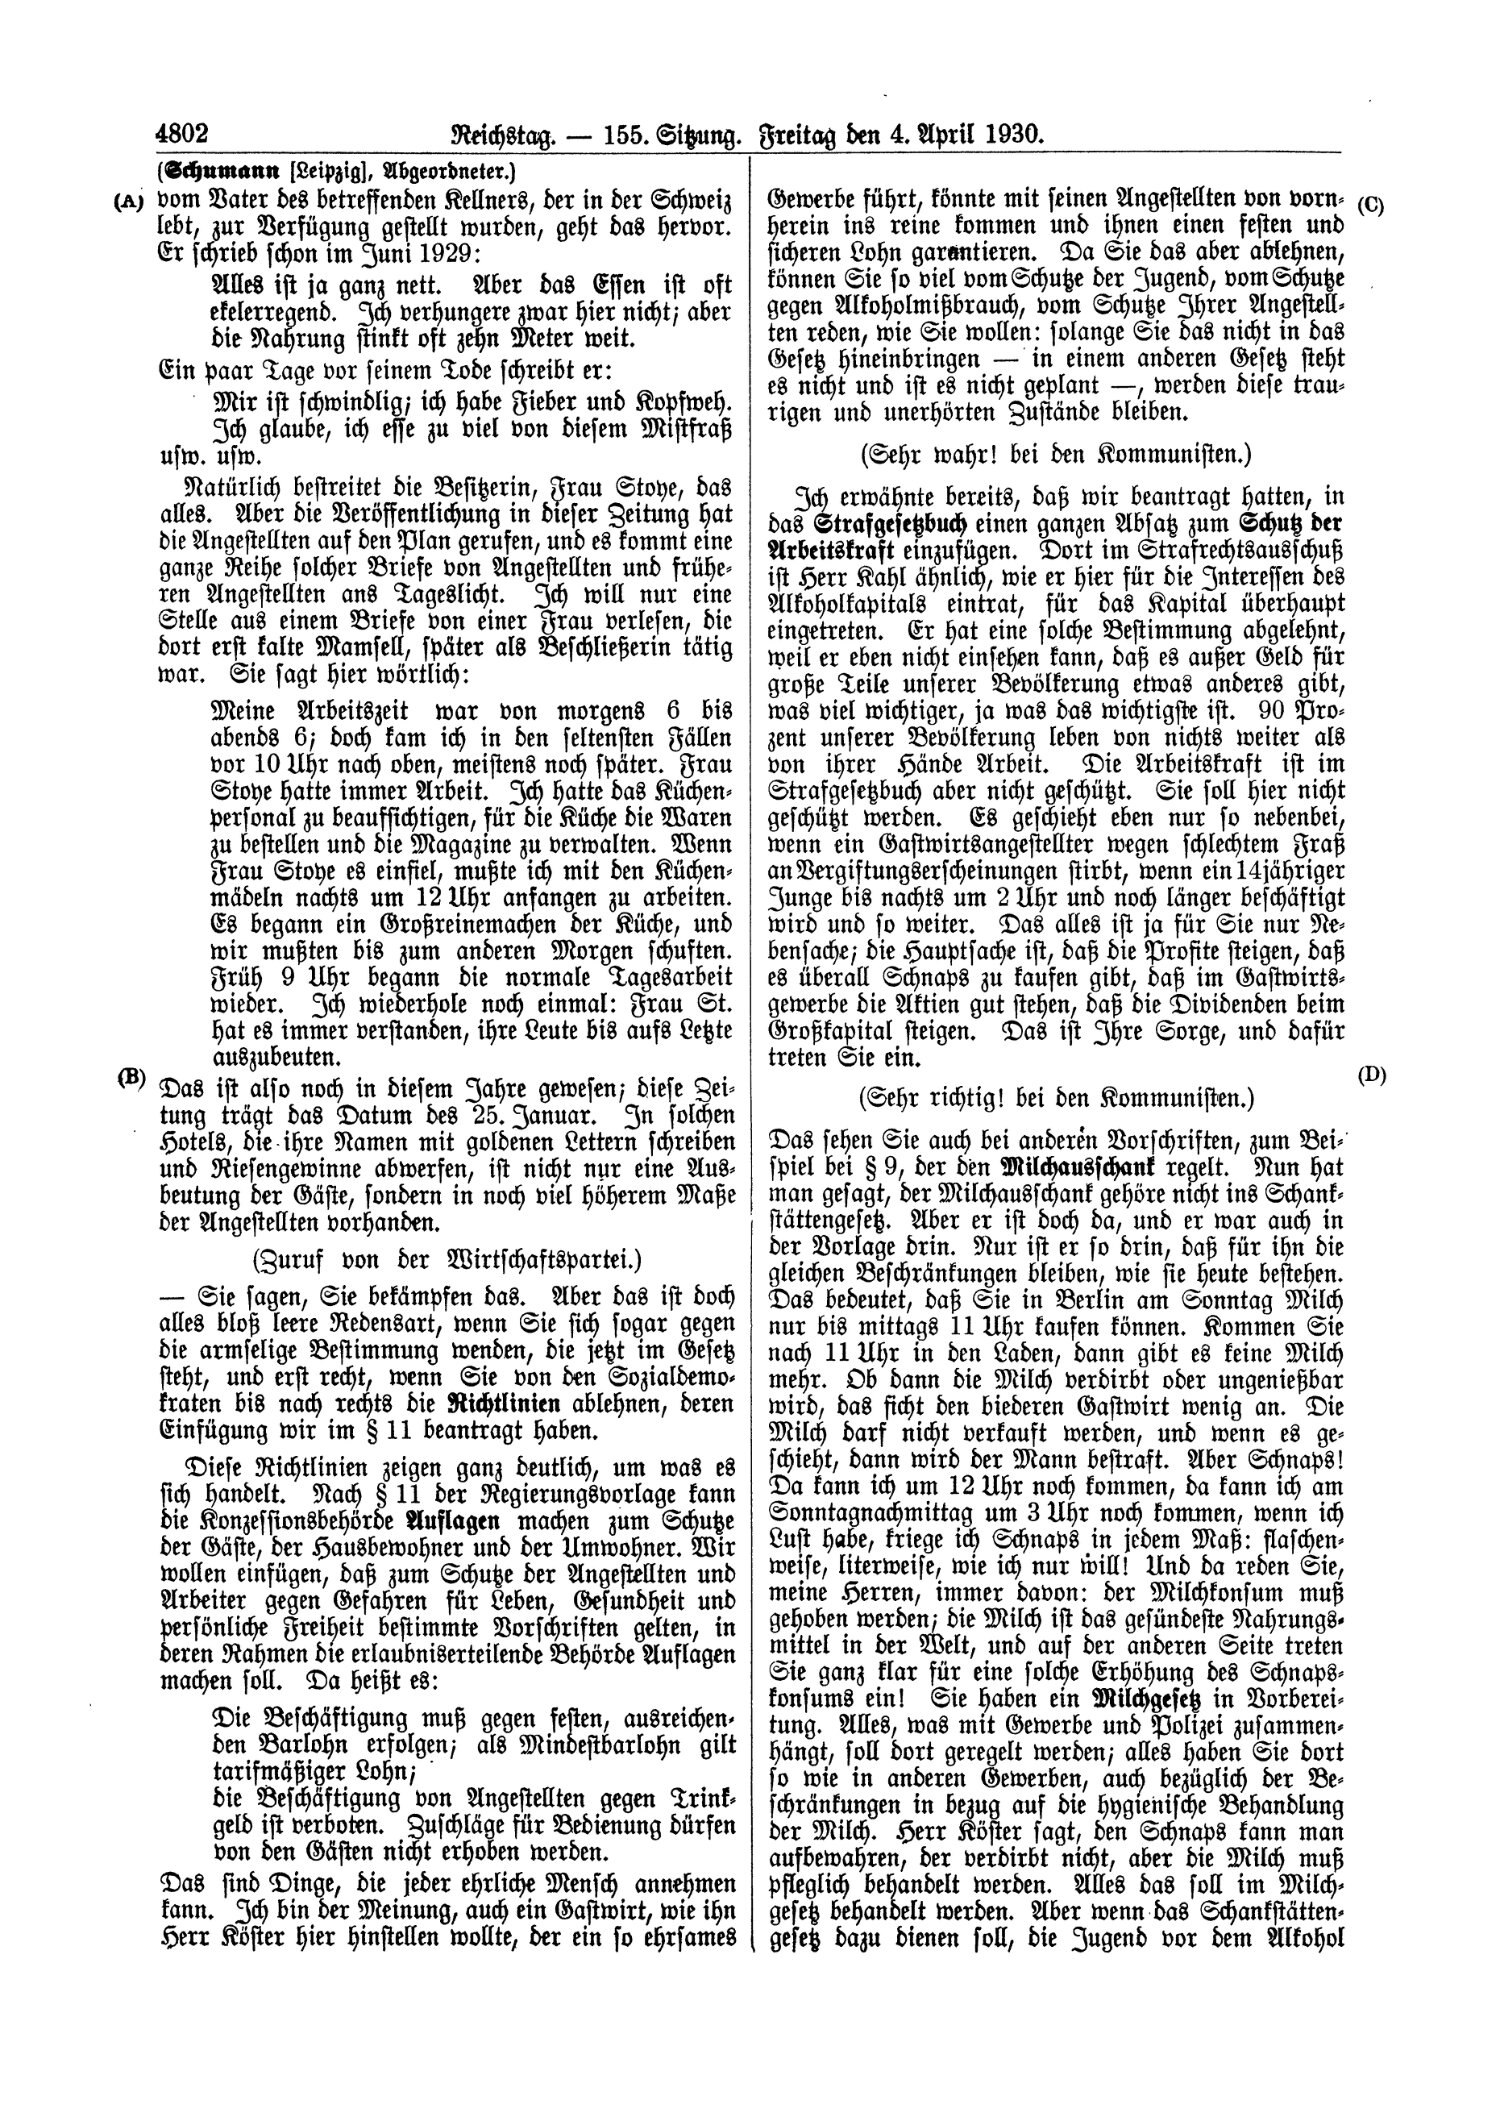 Scan of page 4802